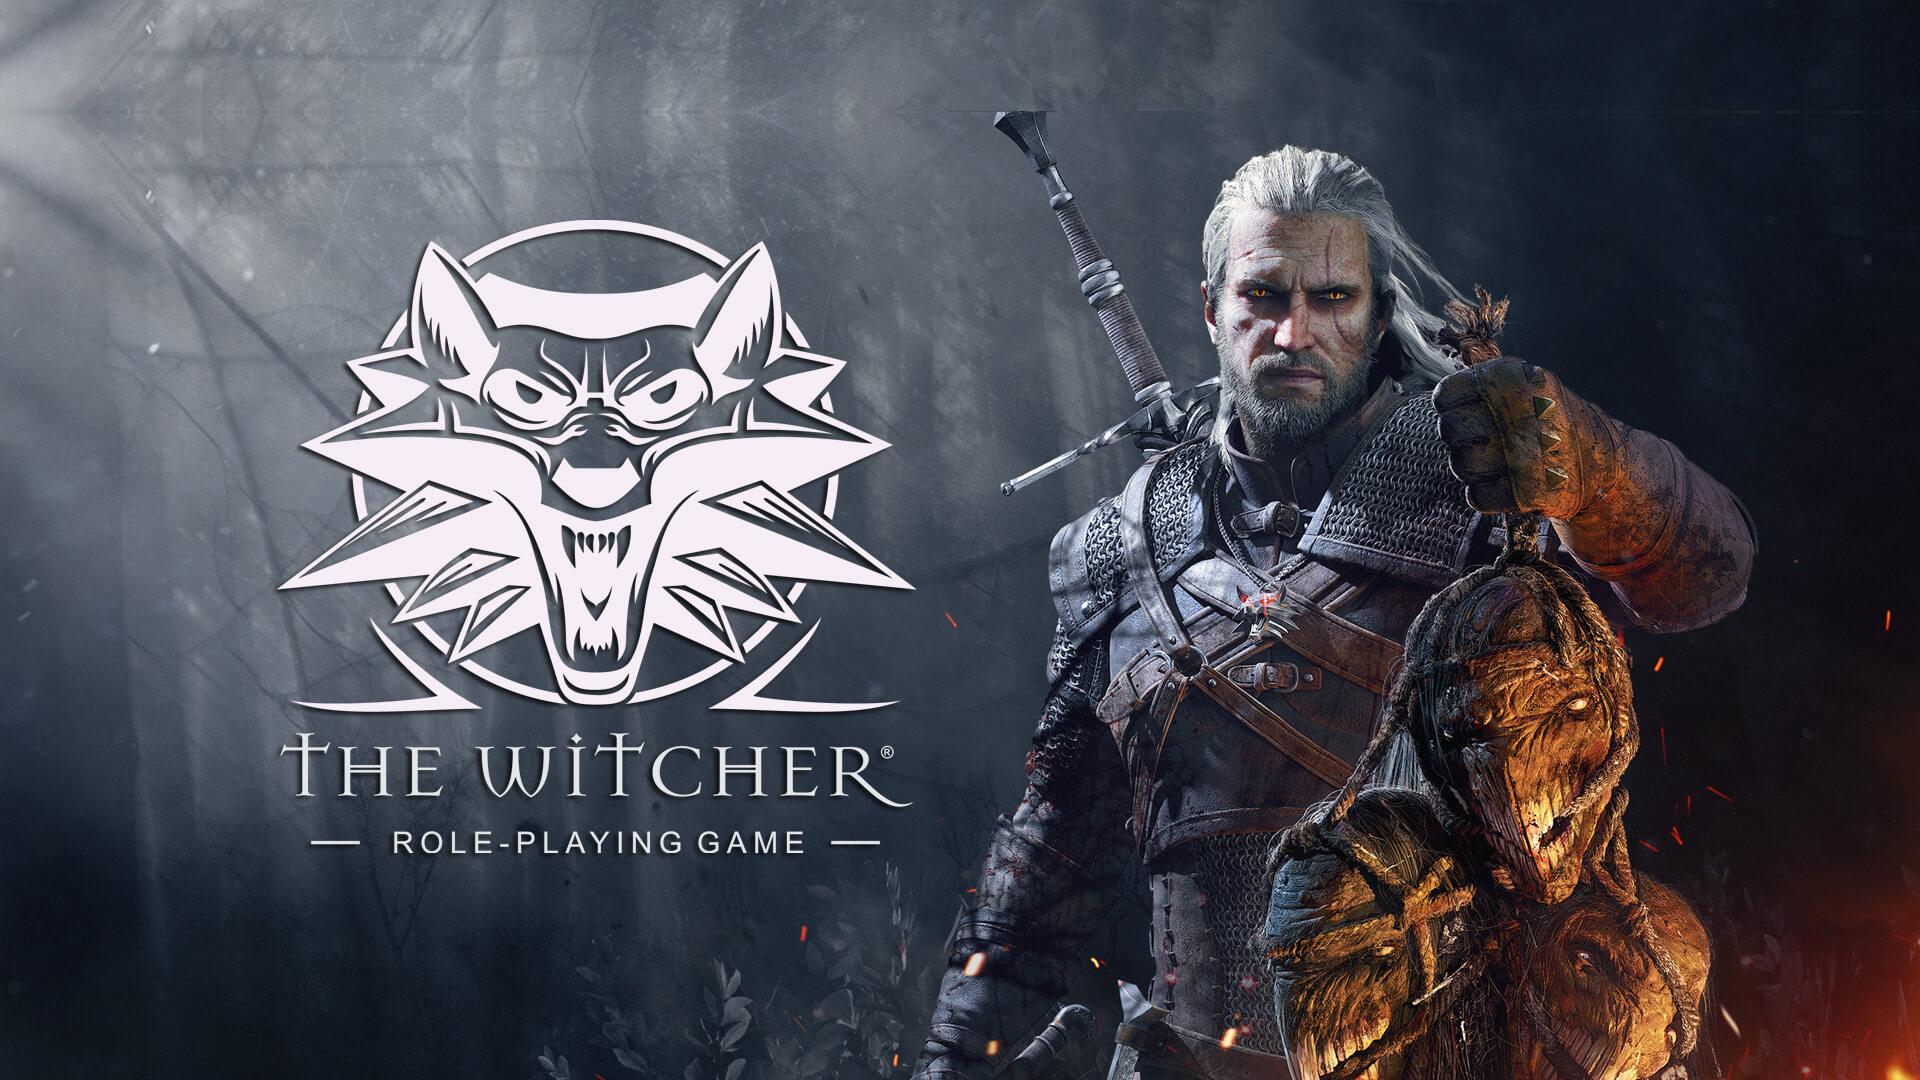 Resenha: The Witcher 3